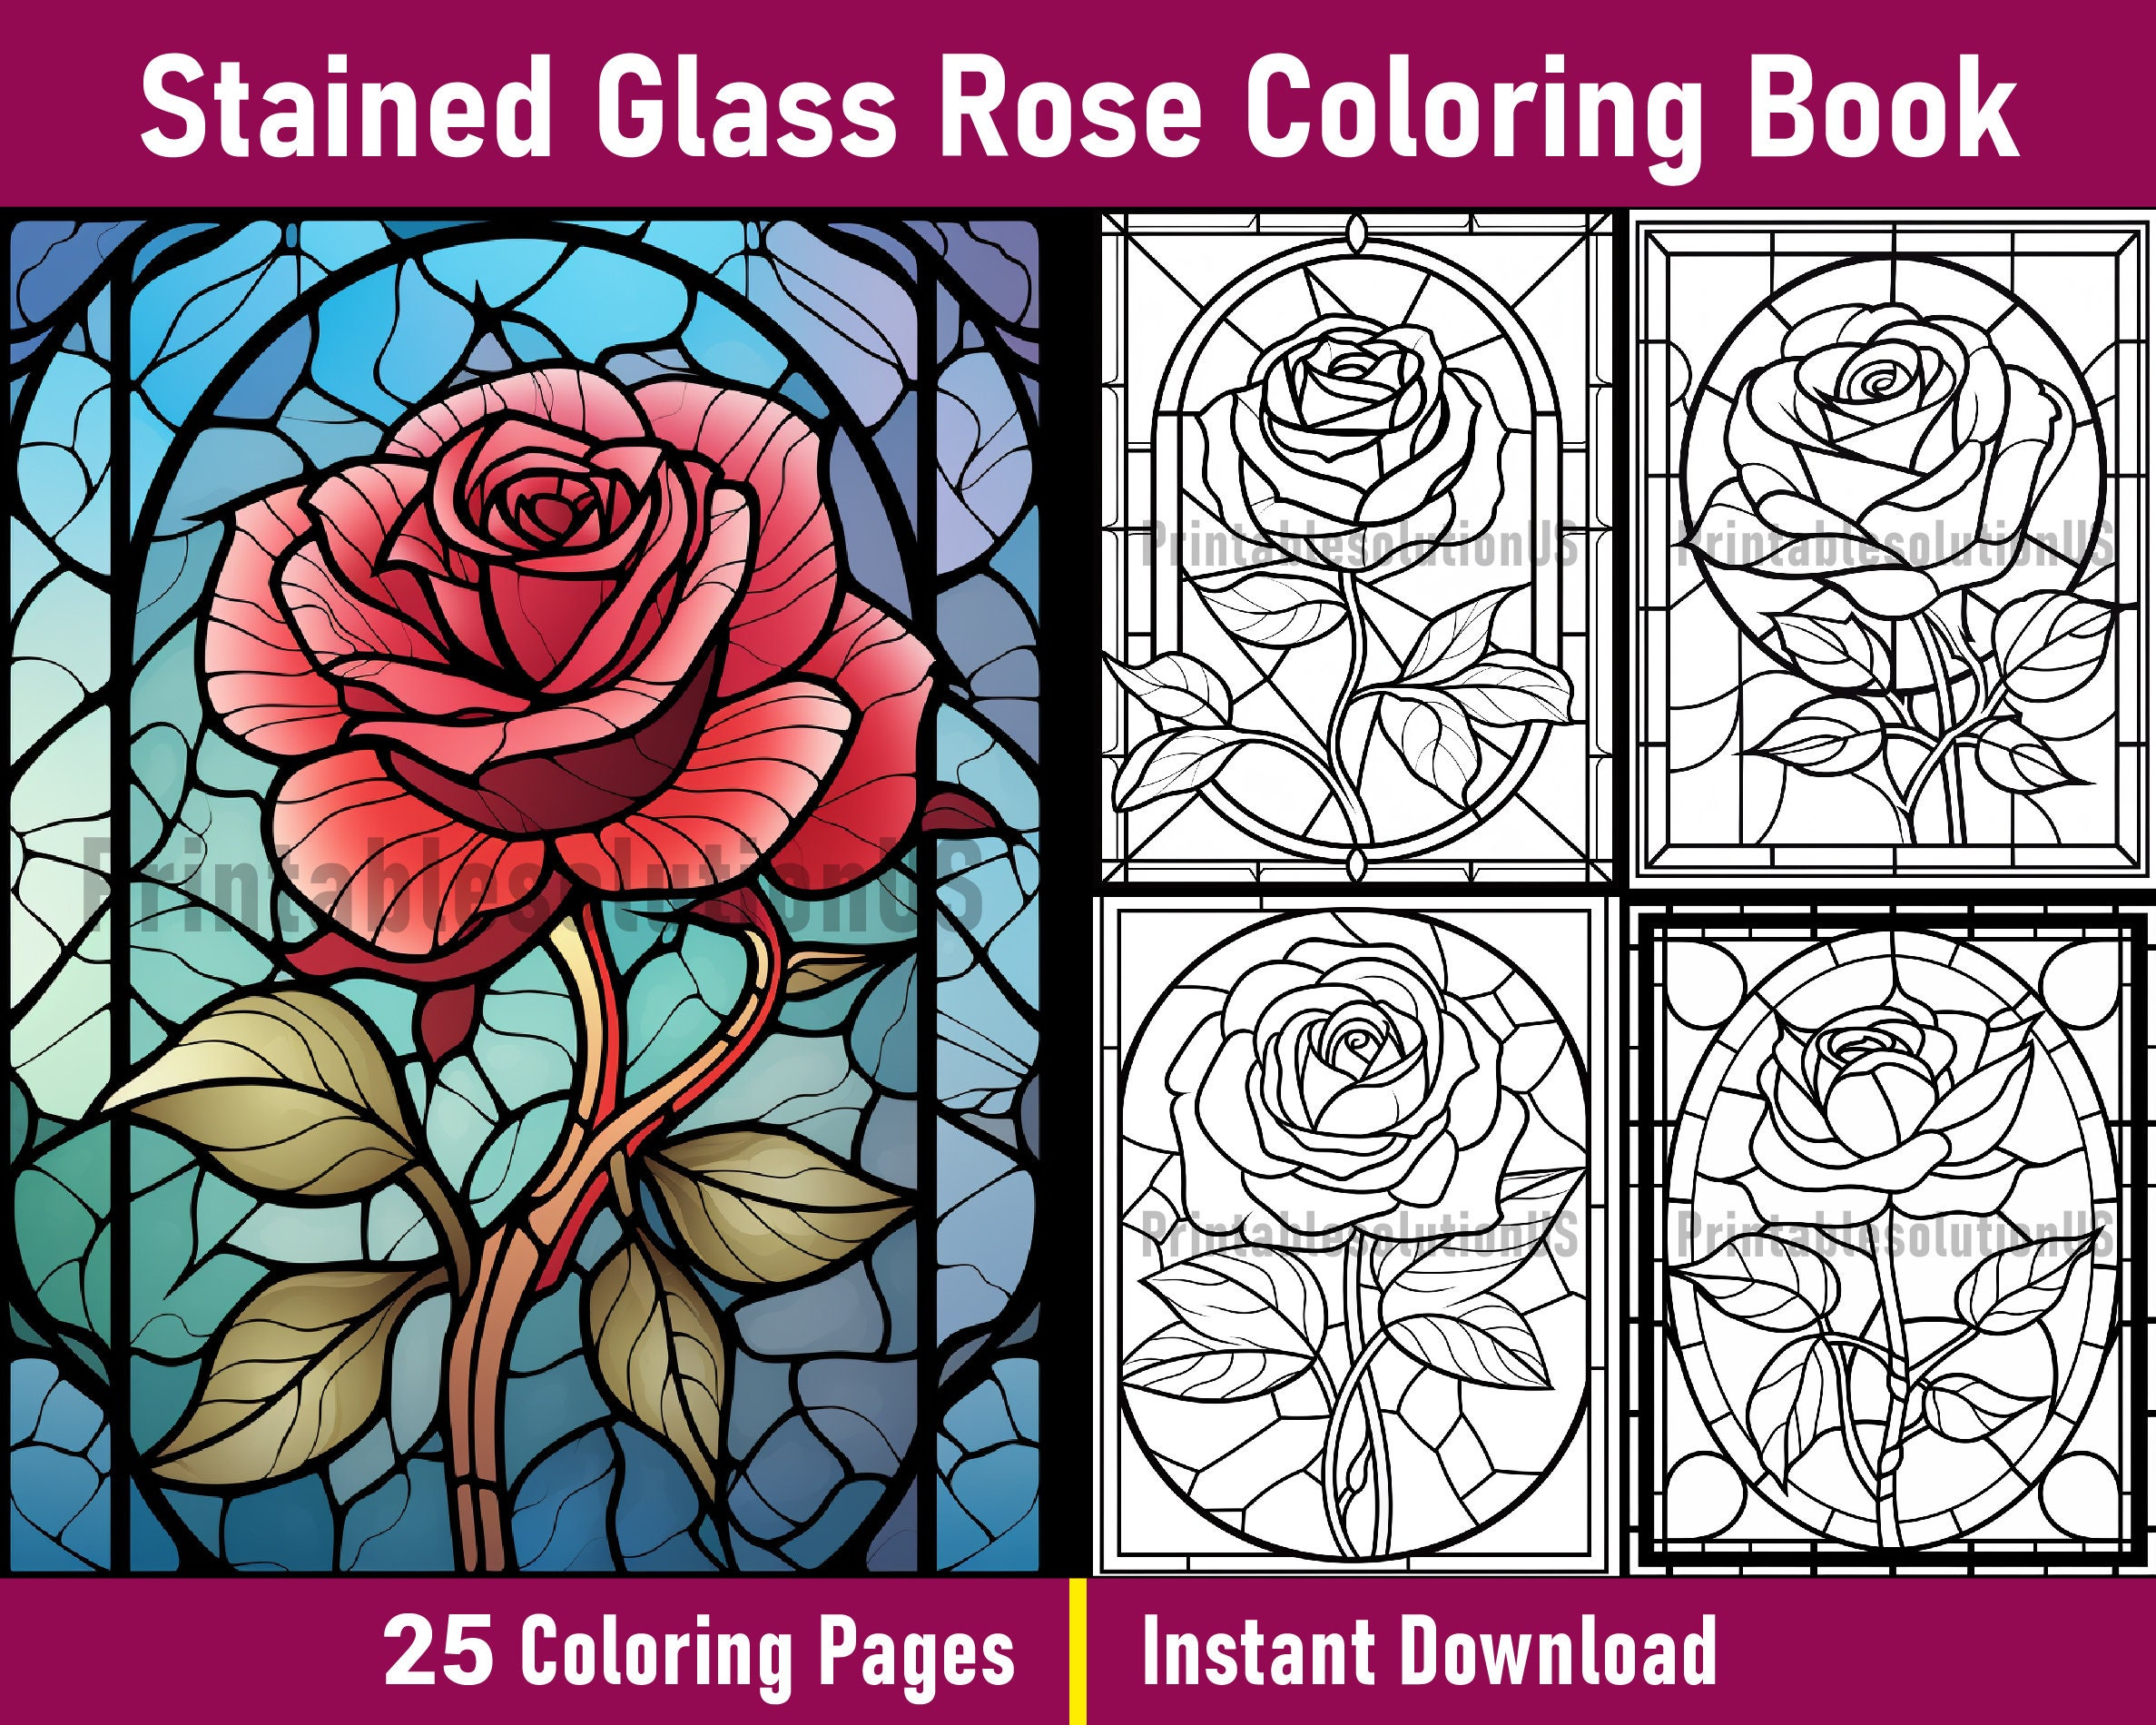 Stained glass rose coloring book vol